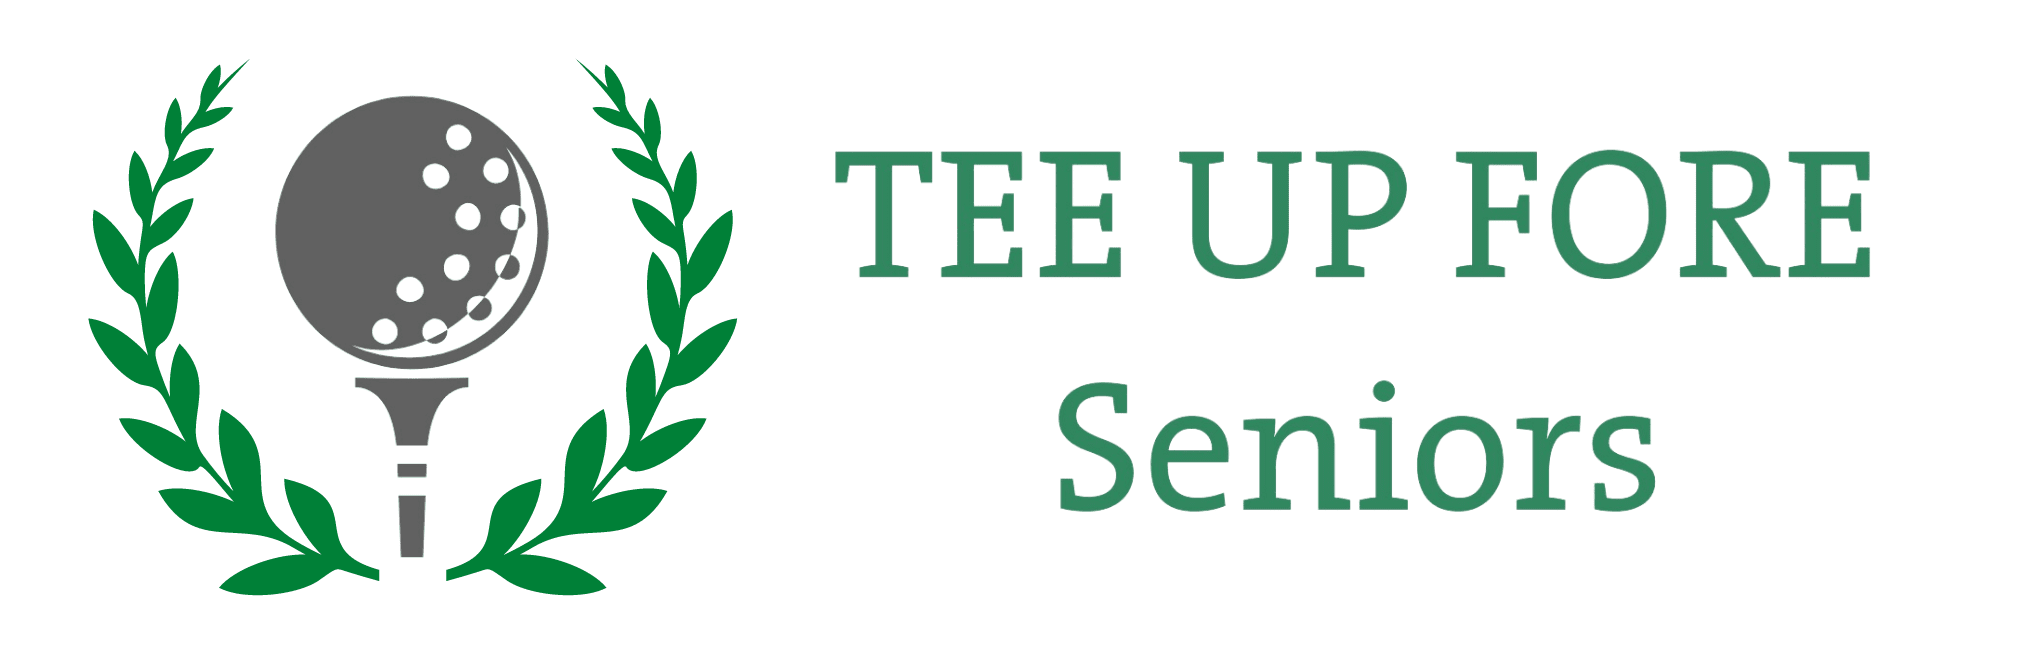 Tee Up Fore Seniors